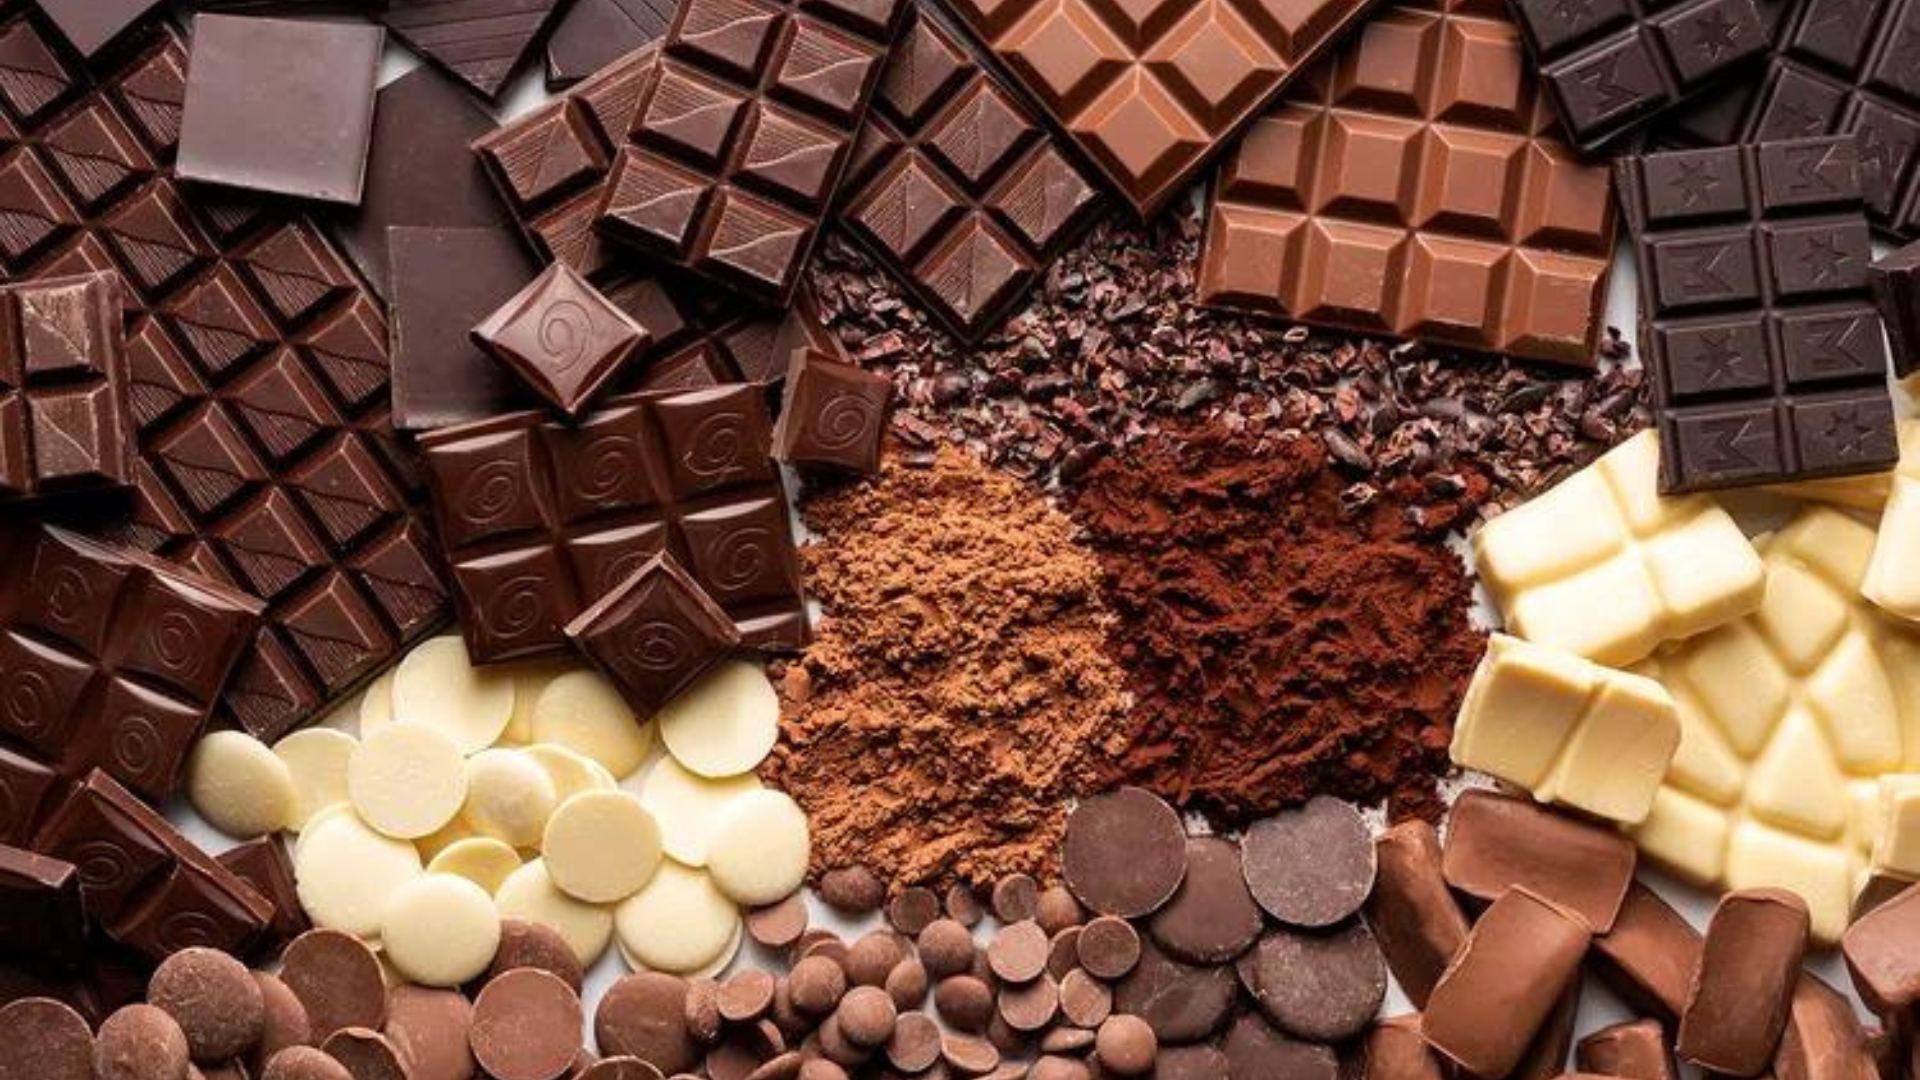 From Cocoa to Confection: Evolution of Chocolate from Ancient Beans to Modern Bars